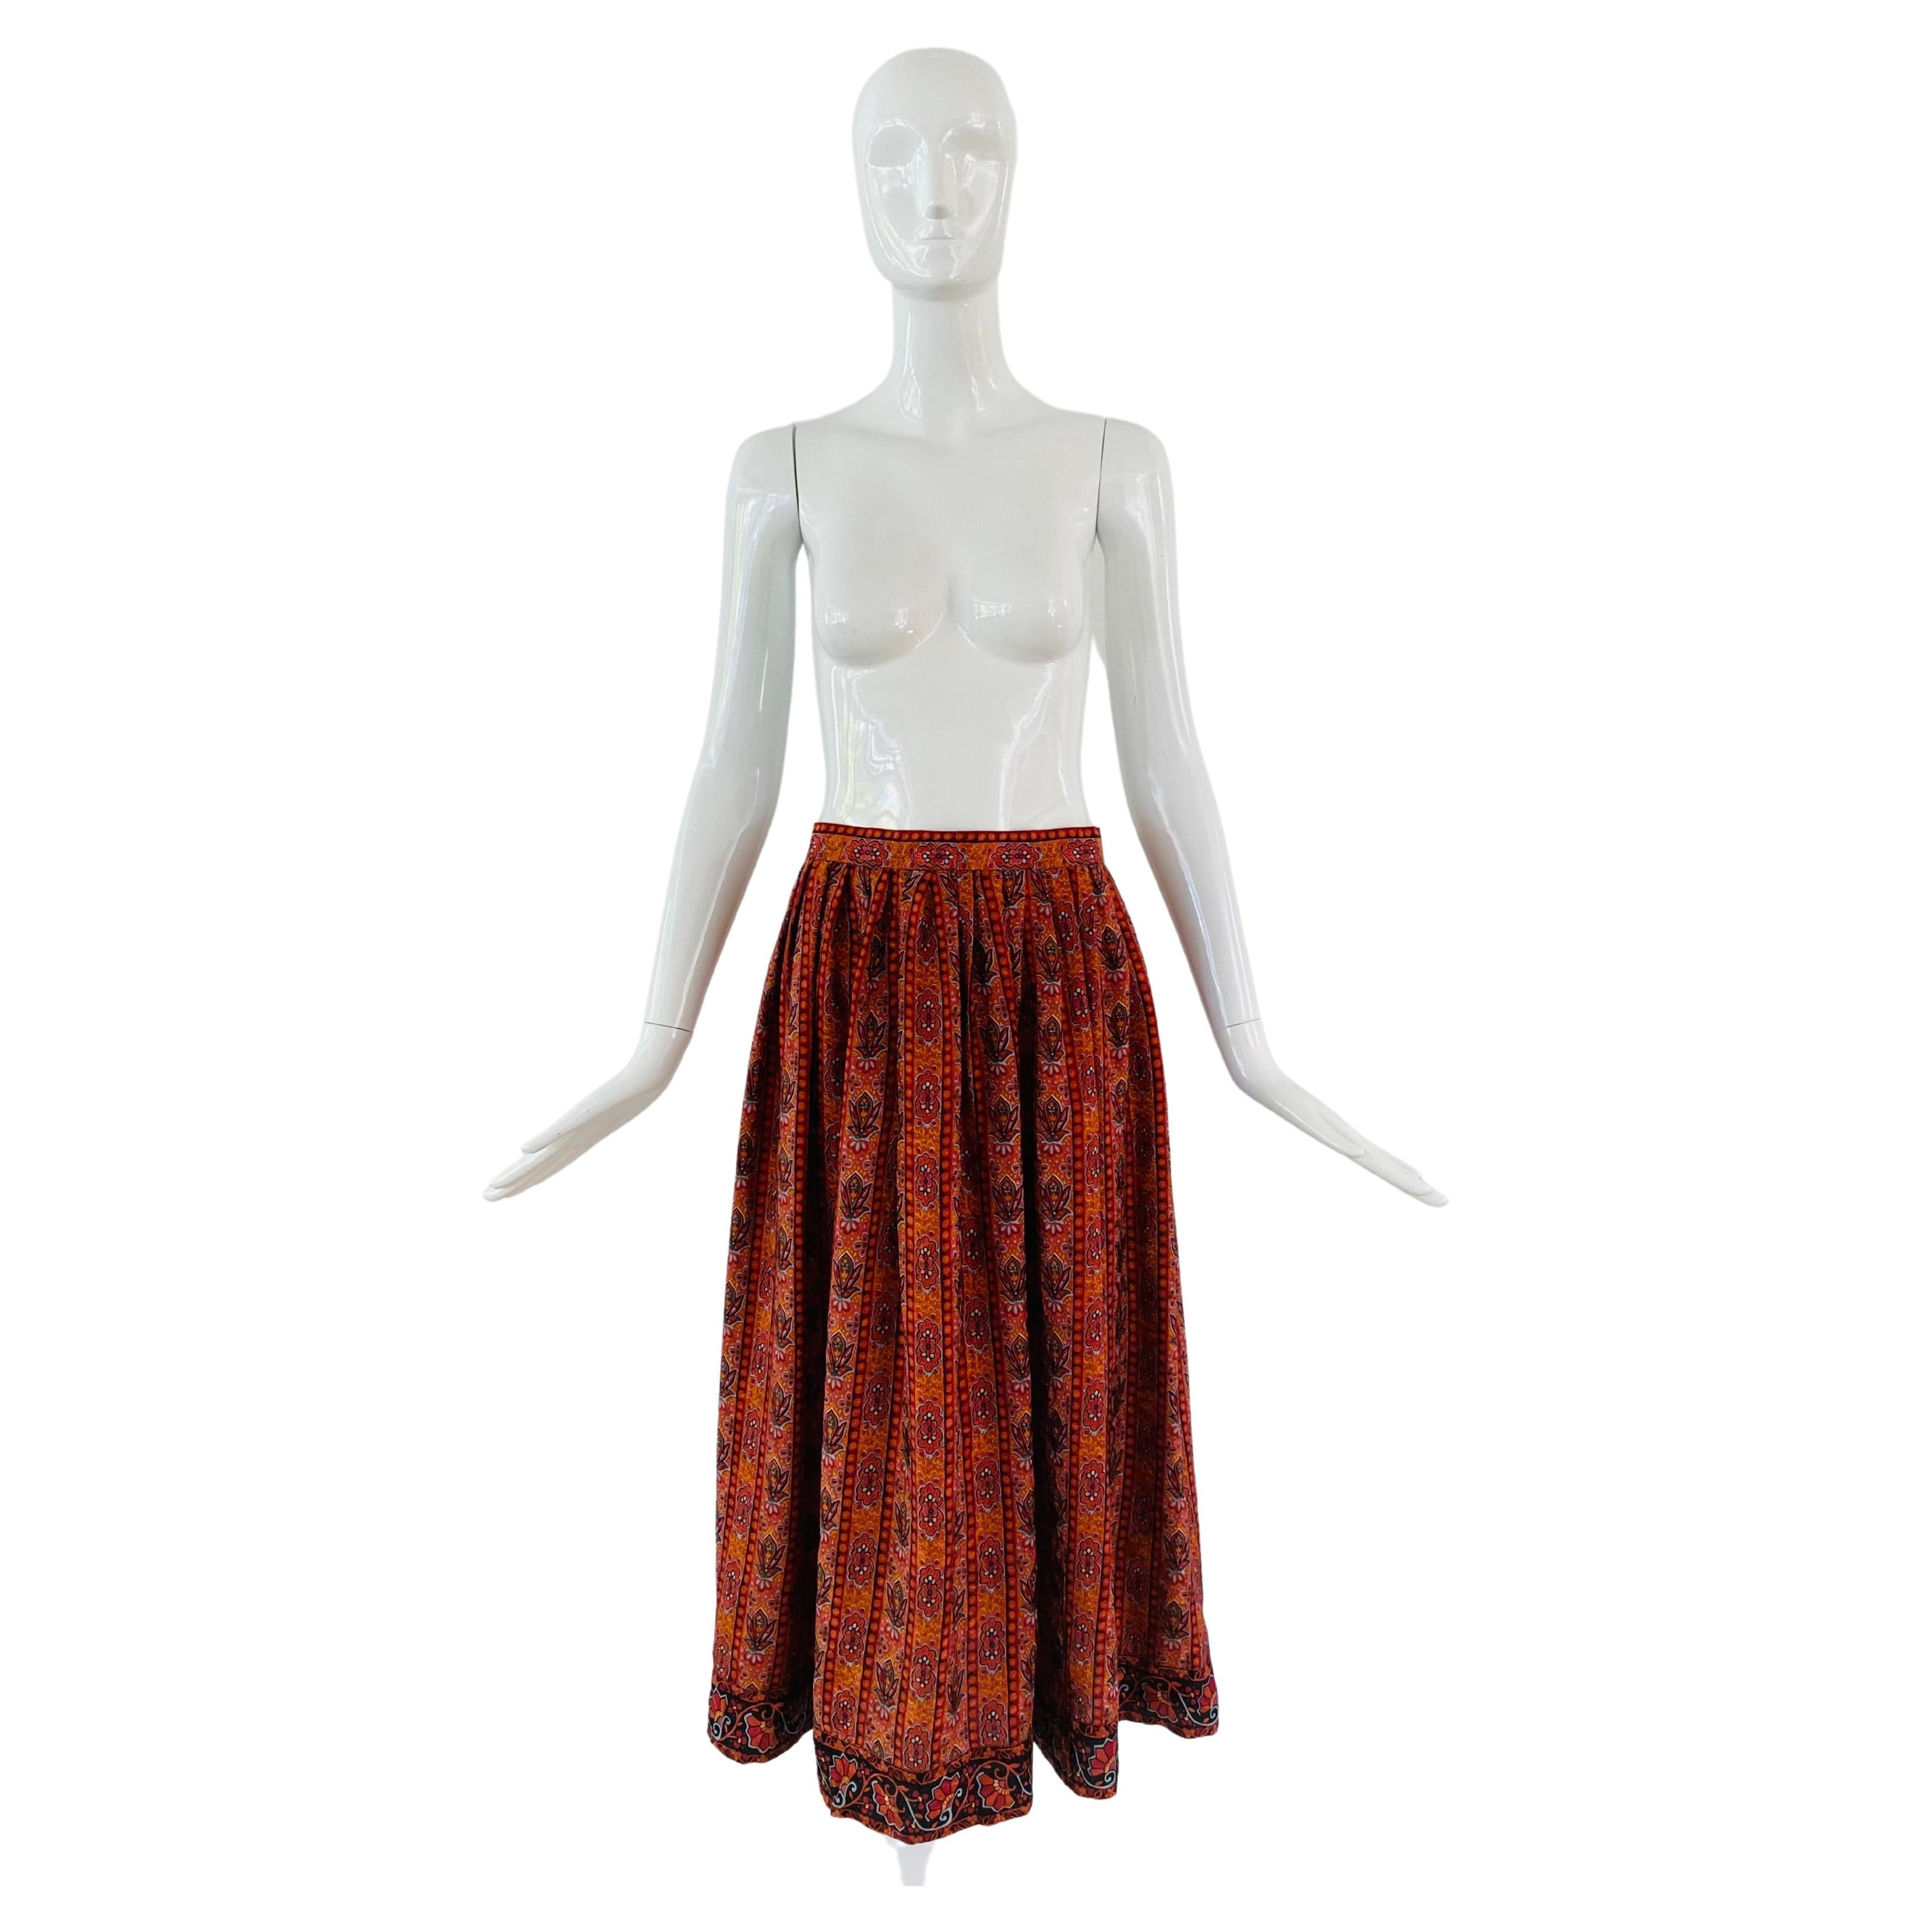 1980s Oscar de la Renta 'Miss O' label midi skirt in flowy and full silk skirt in an Eastern European traditional floral print in vertical lines.  The silk print is done with vibrant colors of orange red and teal. Fitted with a band at the waist and